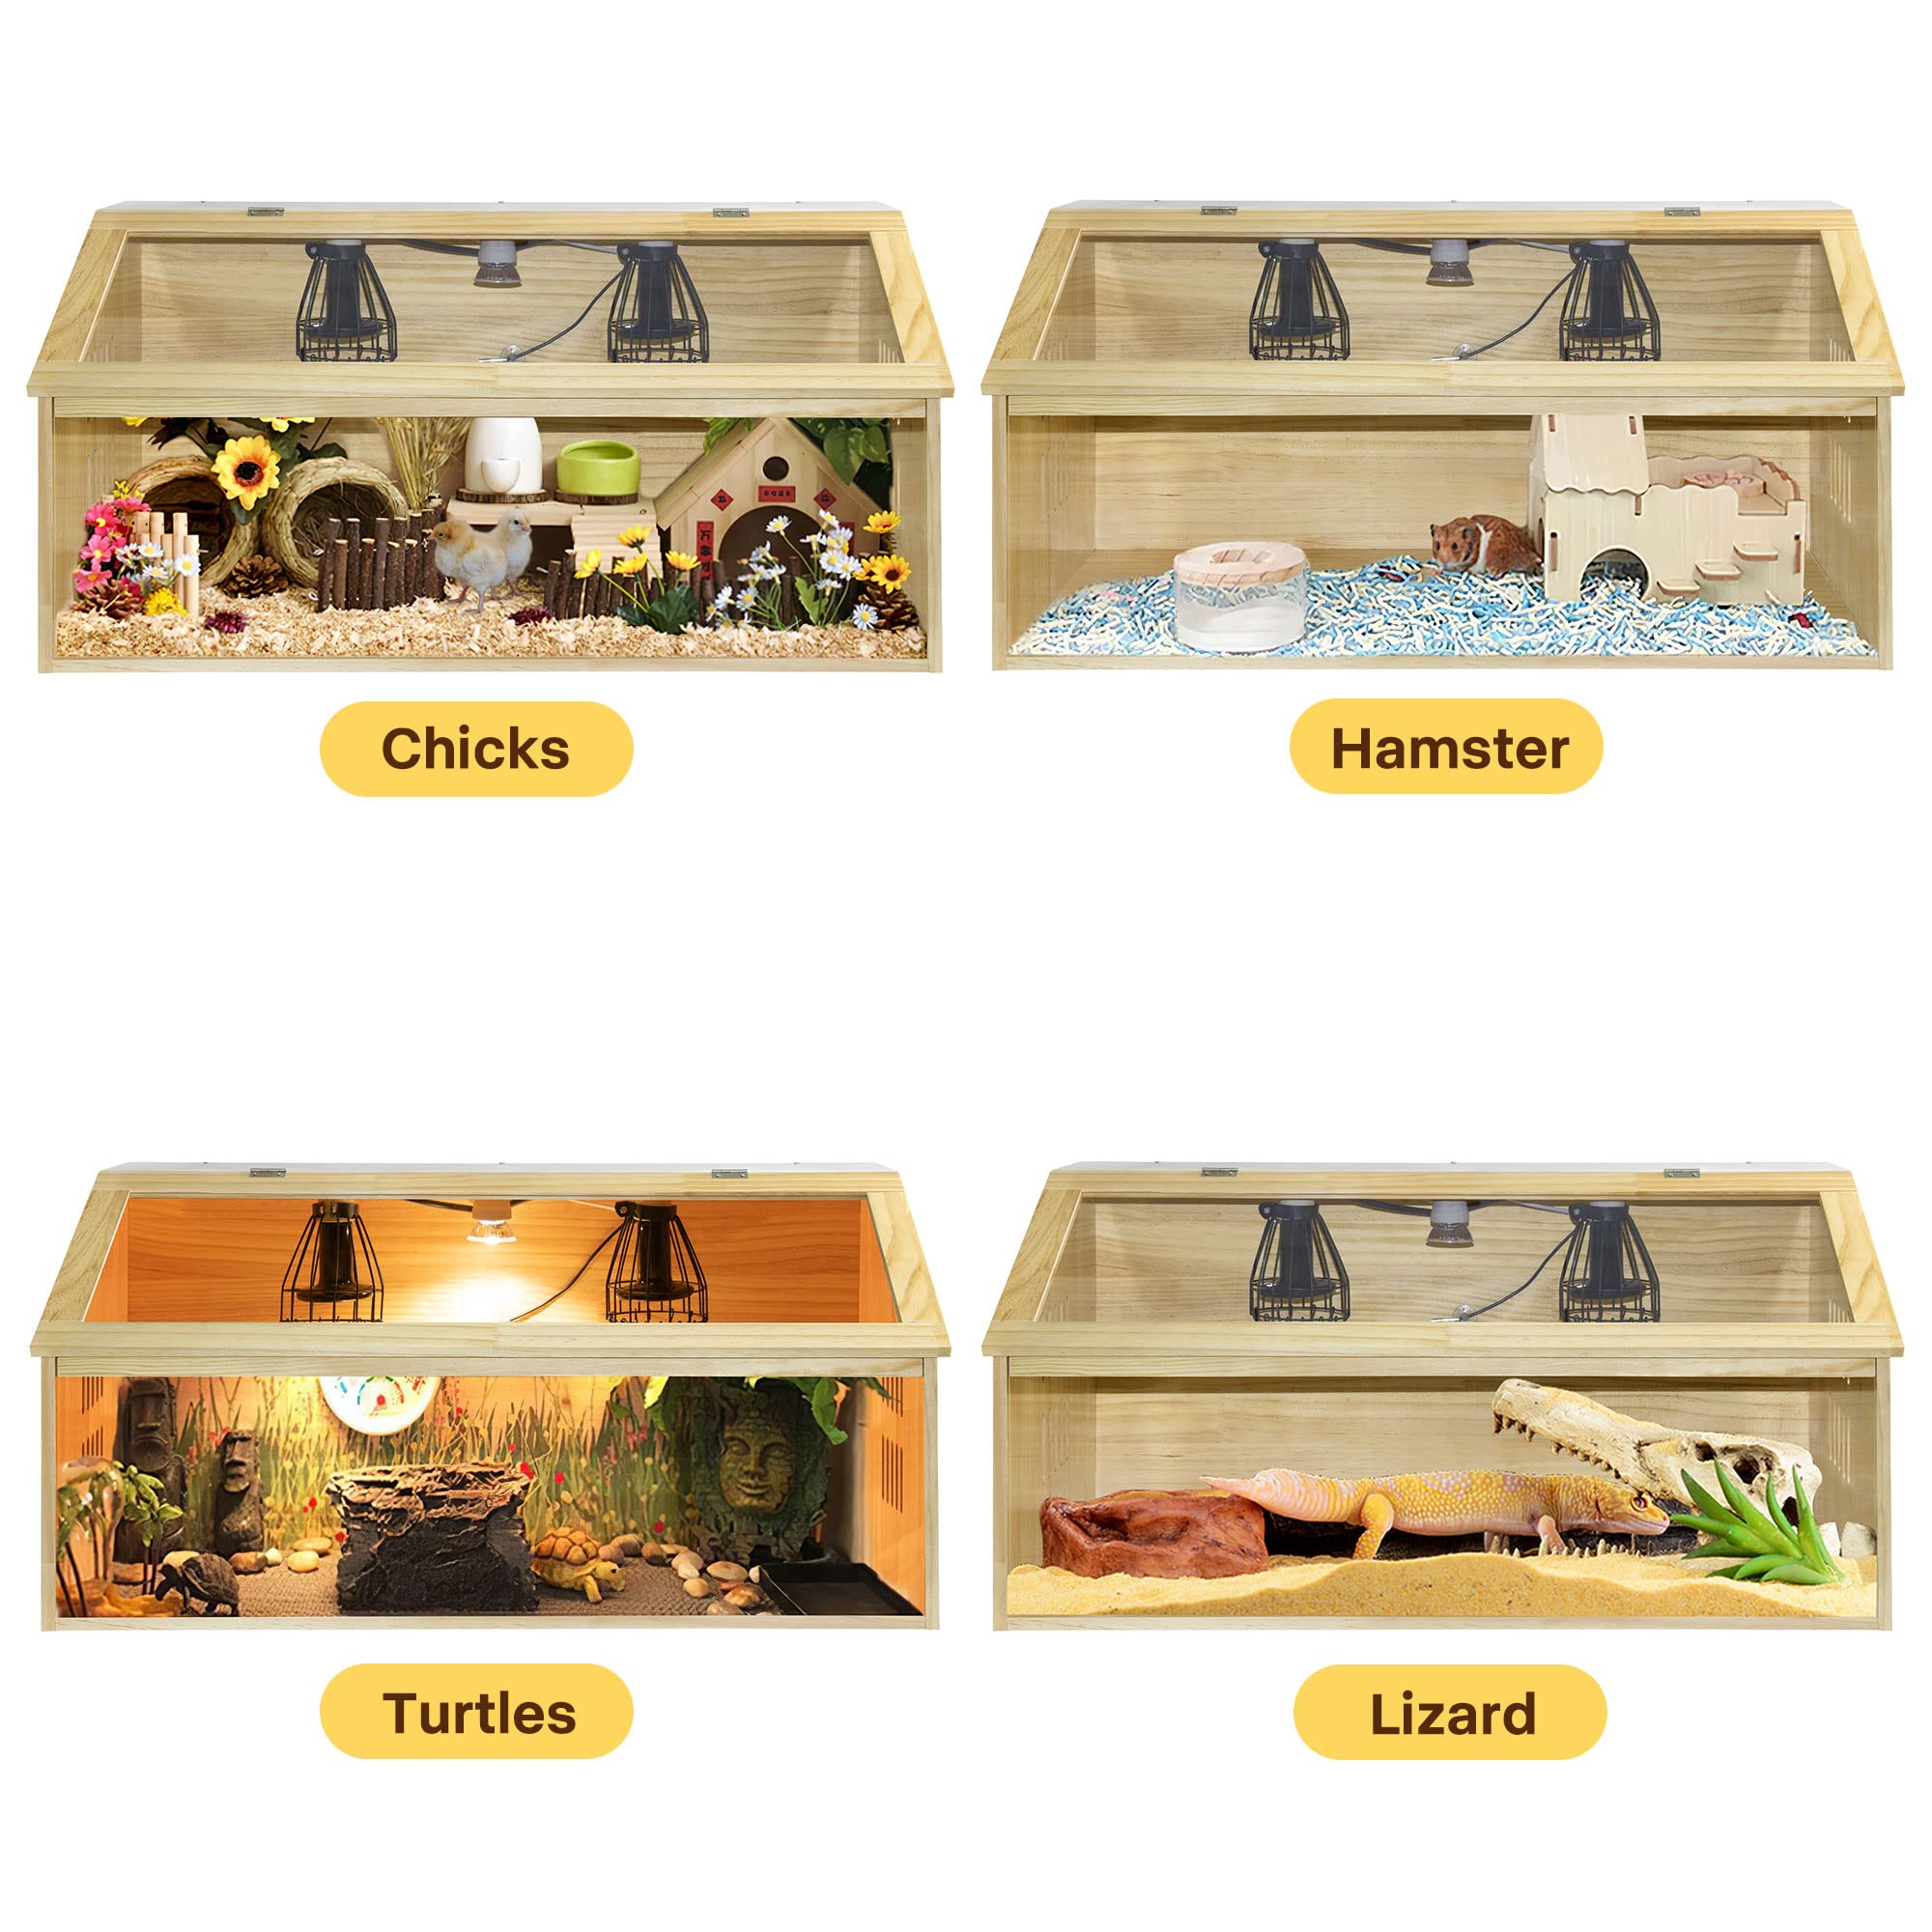 EVERYGROW Brooder Box with Thermostat, Intelligent Chick Brooder Box Heat up to 30 Chicks with 3 Heat Lamps, Waterproof Chicken Brooder Box Kit, Brooder Box for Baby Chicks Ducks Quails Hamsters